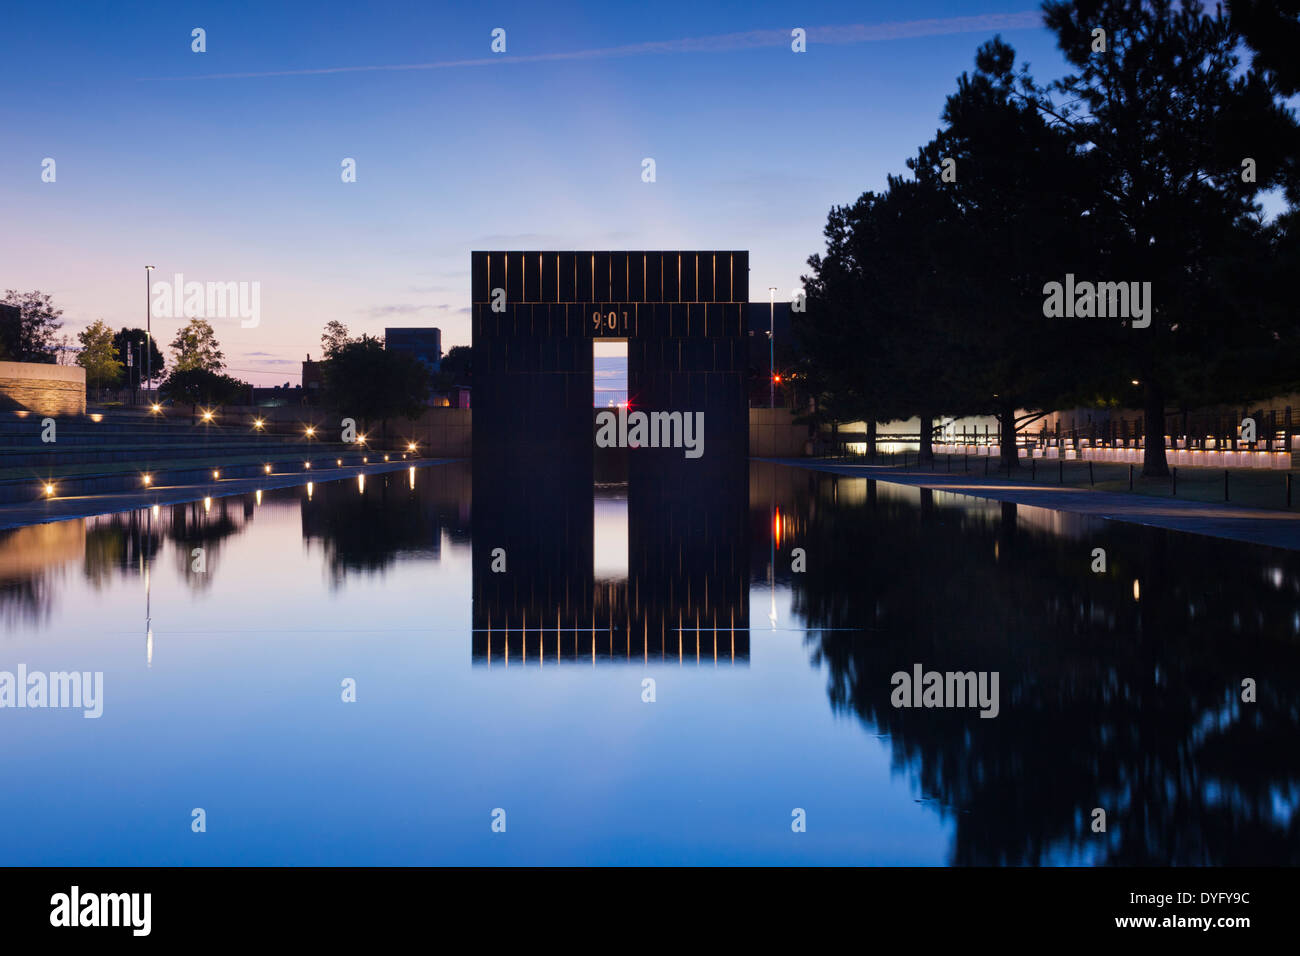 USA, Oklahoma, Oklahoma City, National Memorial to the victims of the Alfred P Murrah Federal Building Bombing on April 19, 1995 Stock Photo